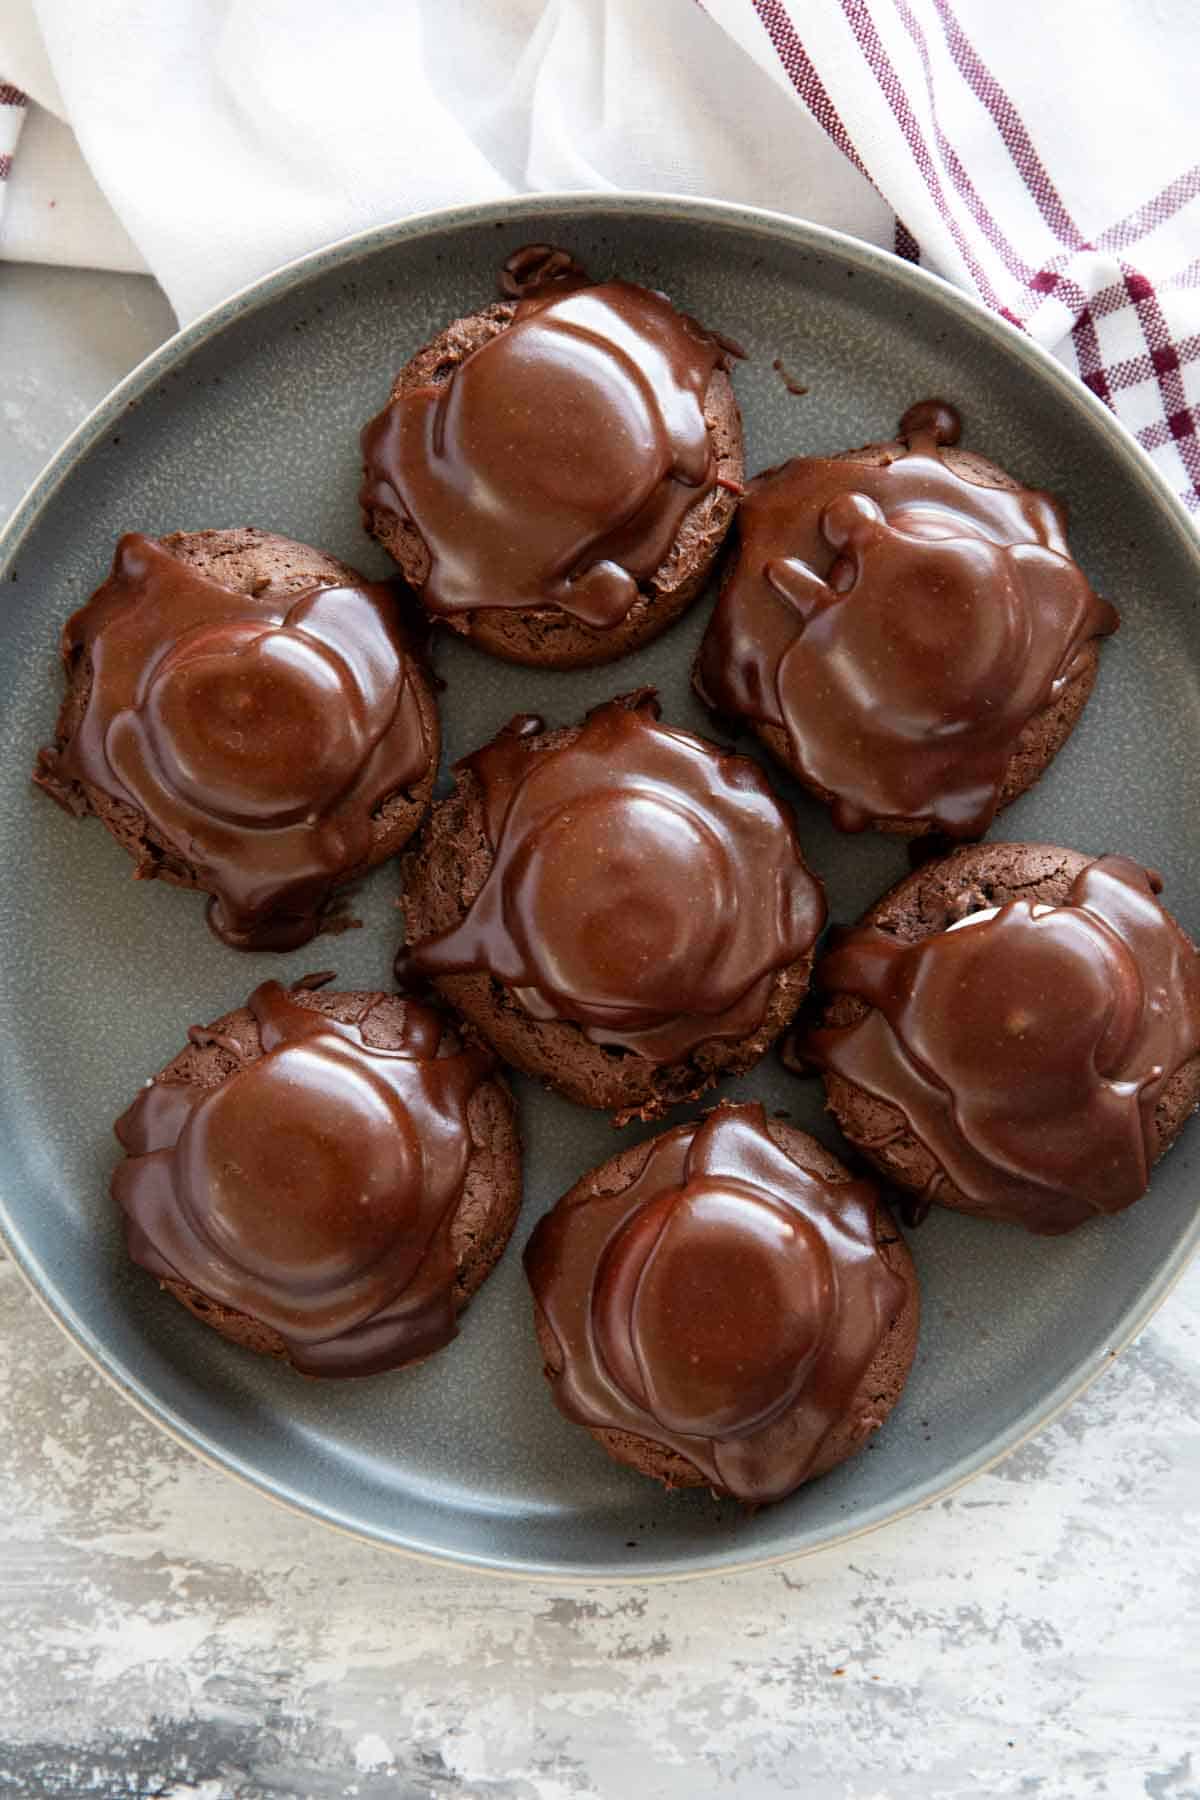 7 Chocolate Marshmallow Cookies on a gray plate.